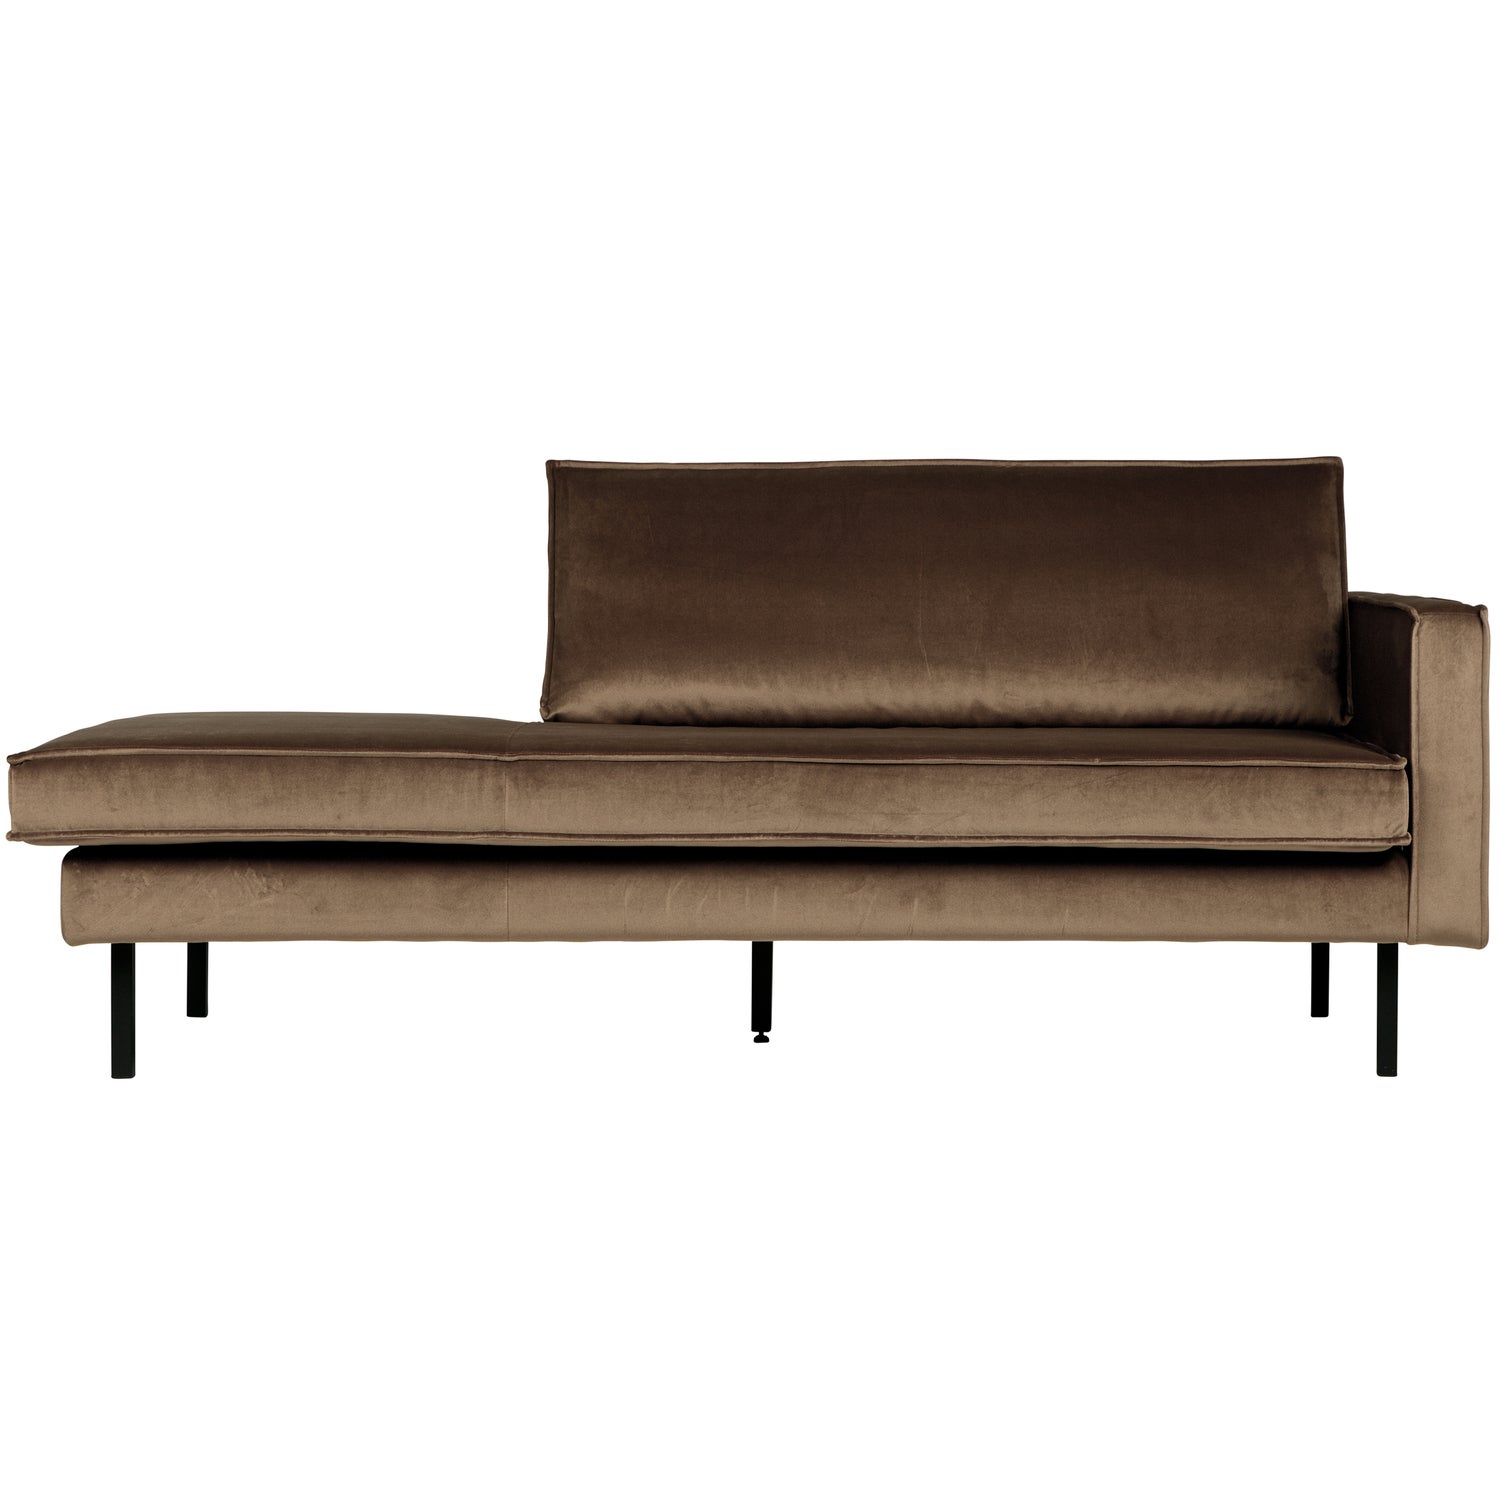 800746-12-01_VS_BP_Rodeo_daybed_right_taupe_EA.jpg?auto=webp&format=png&width=2000&height=2000